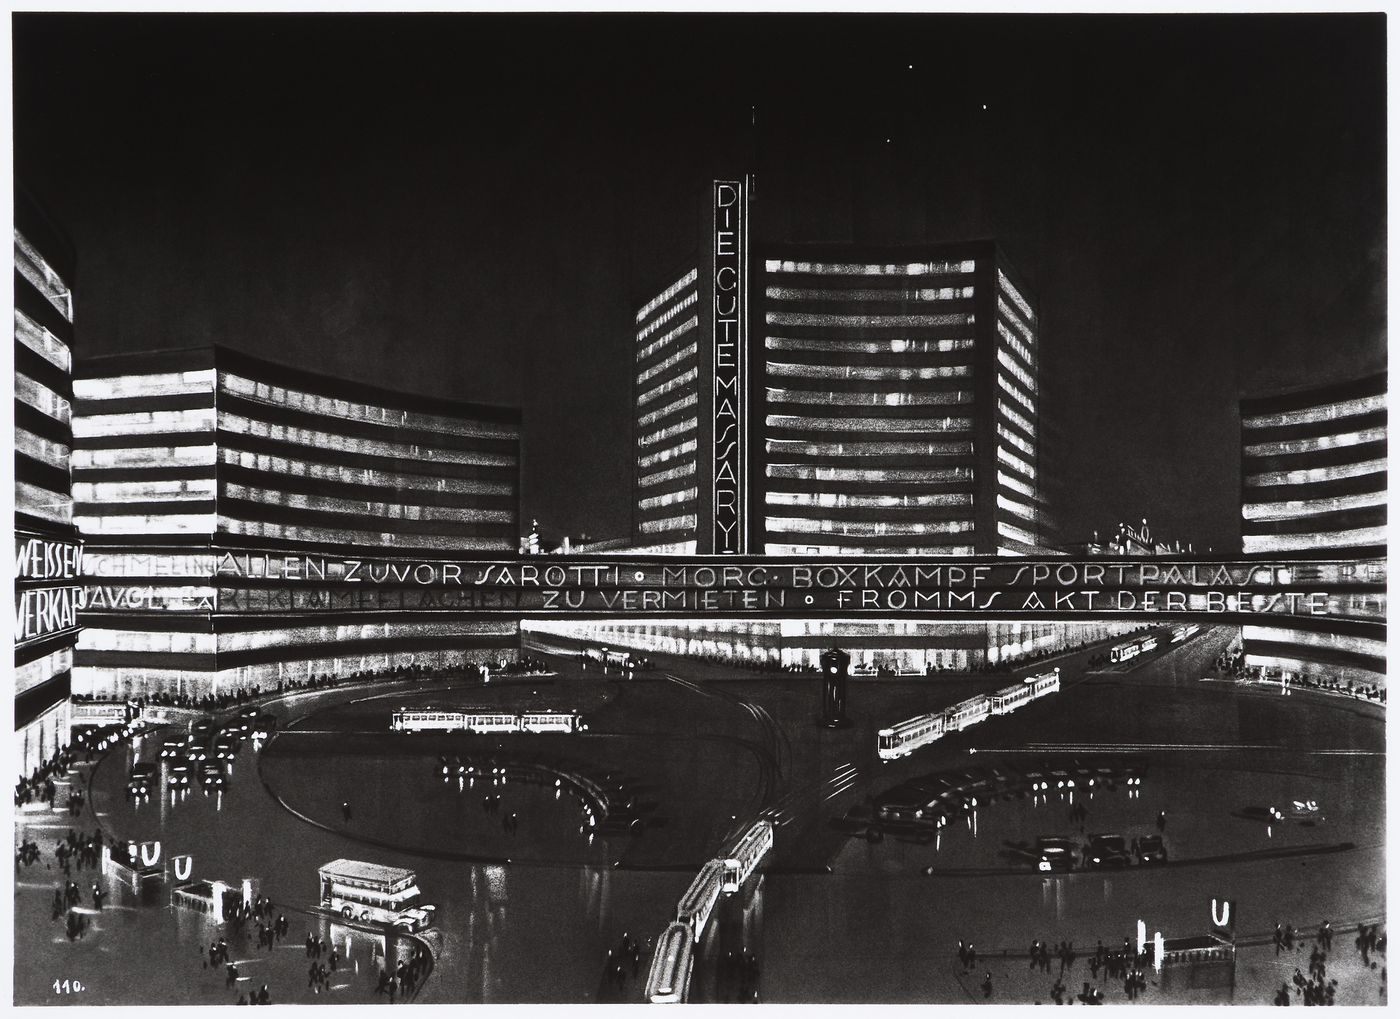 Photograph of a perspective drawing, probably for the competition for the urban renewal of Alexanderplatz 1928-1929, Berlin